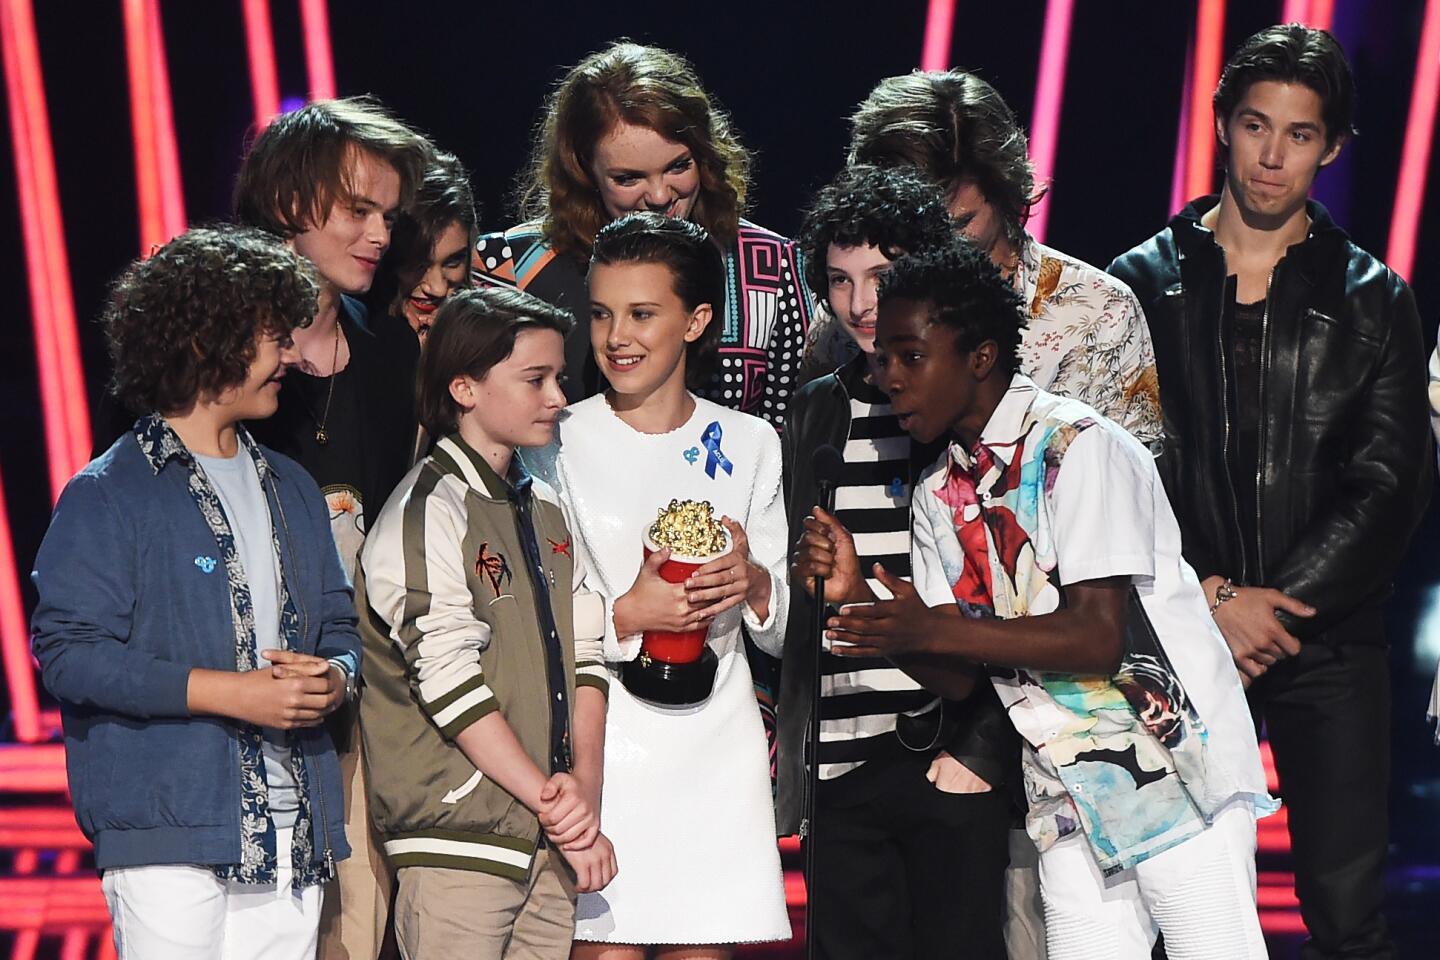 The cast of "Stranger Things" accepts Show of the Year award during the 2017 MTV Movie & TV Awards at the Shrine Auditorium in Los Angeles.